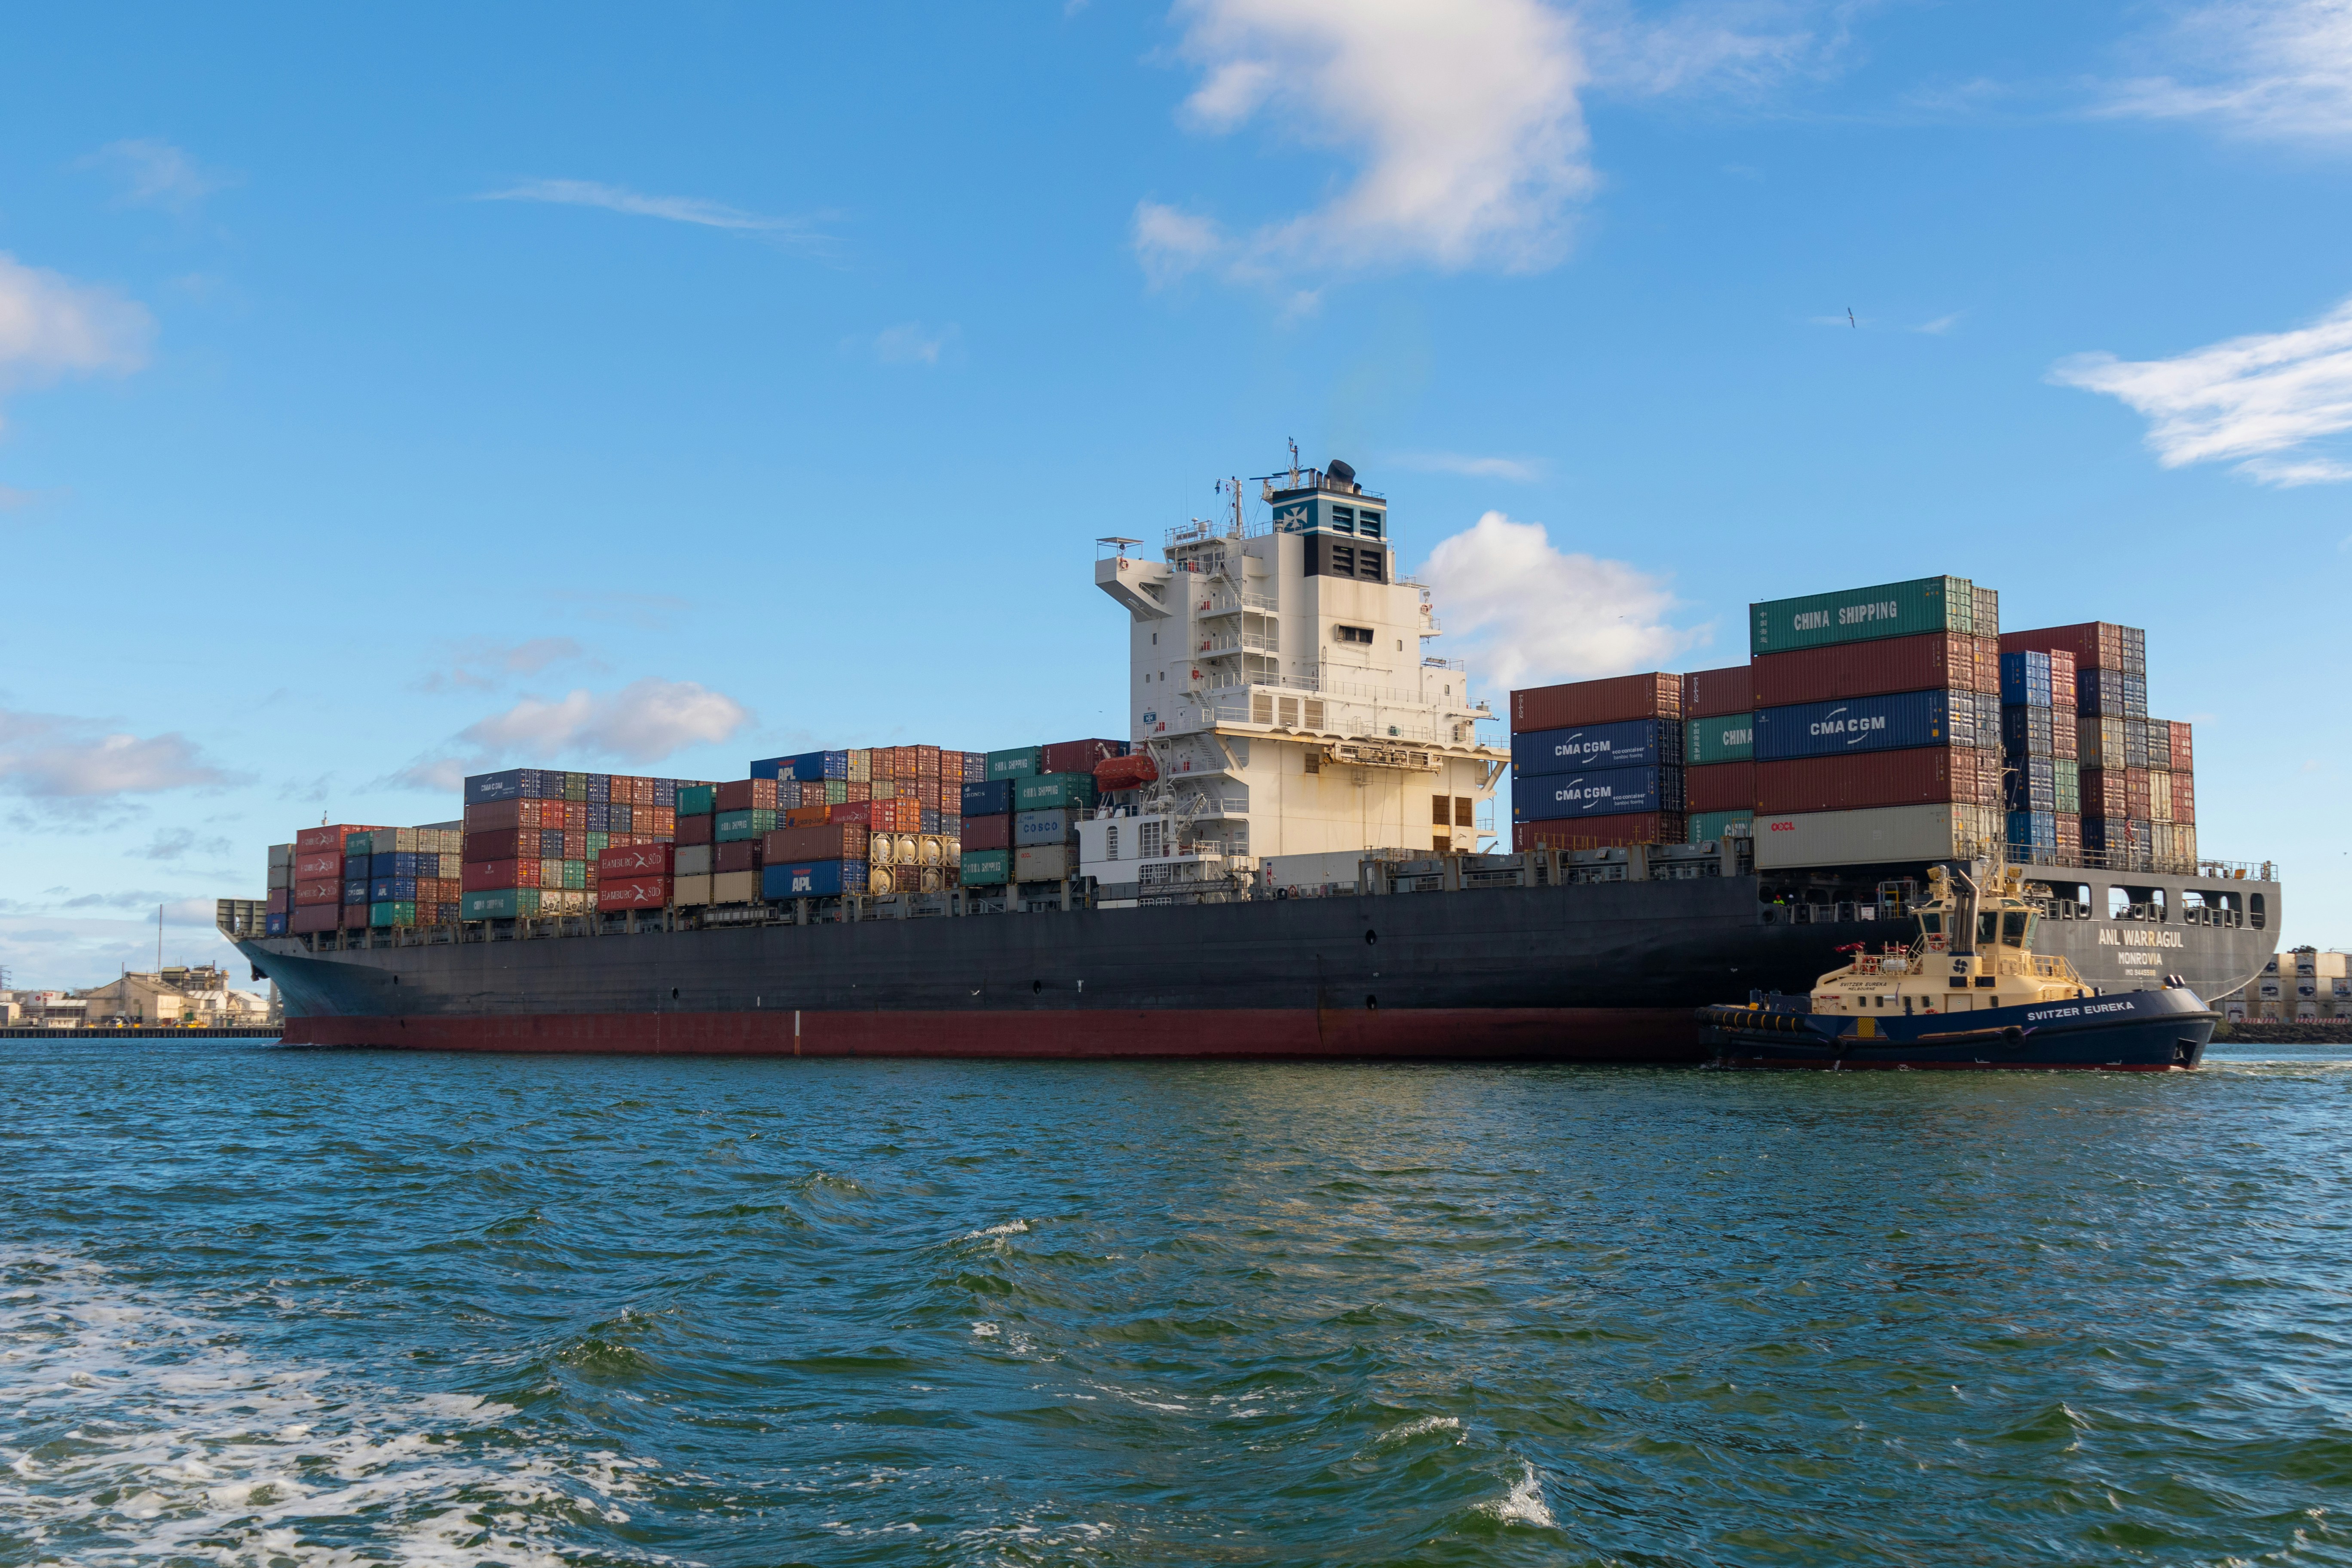 Maritime cargo, macroeconomic indicator for supply chain planners